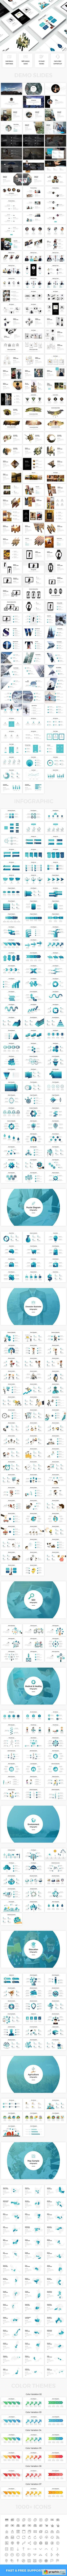 Business - Multipurpose Powerpoint Template